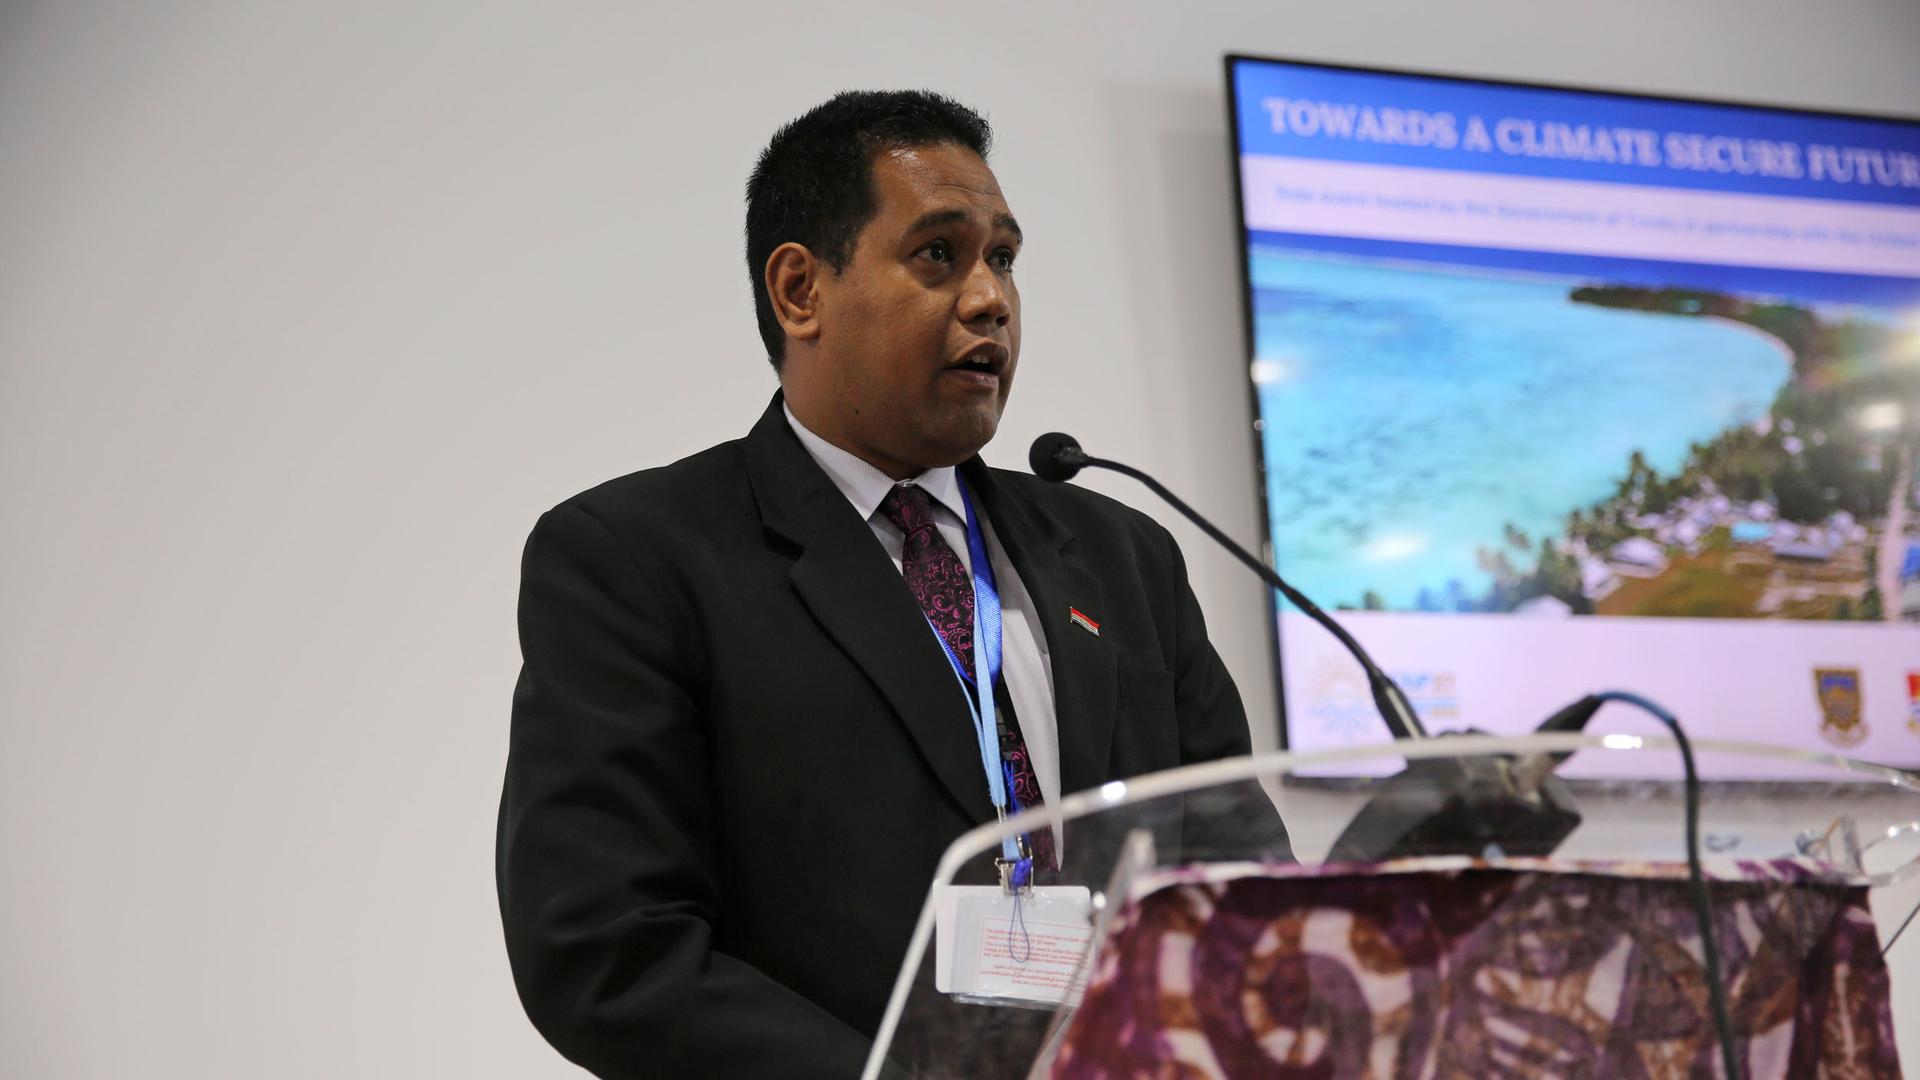 Kiribati Minister of Justice, Hon Takarabu Tofinga, speaks at a panel discussion on climate security in the Pacific, in the Moana Blue Pacific Pavilion of the COP27 UN Climate Summit in Sharm el-Sheikh, Egypt, Tuesday, Nov. 15, 2022.